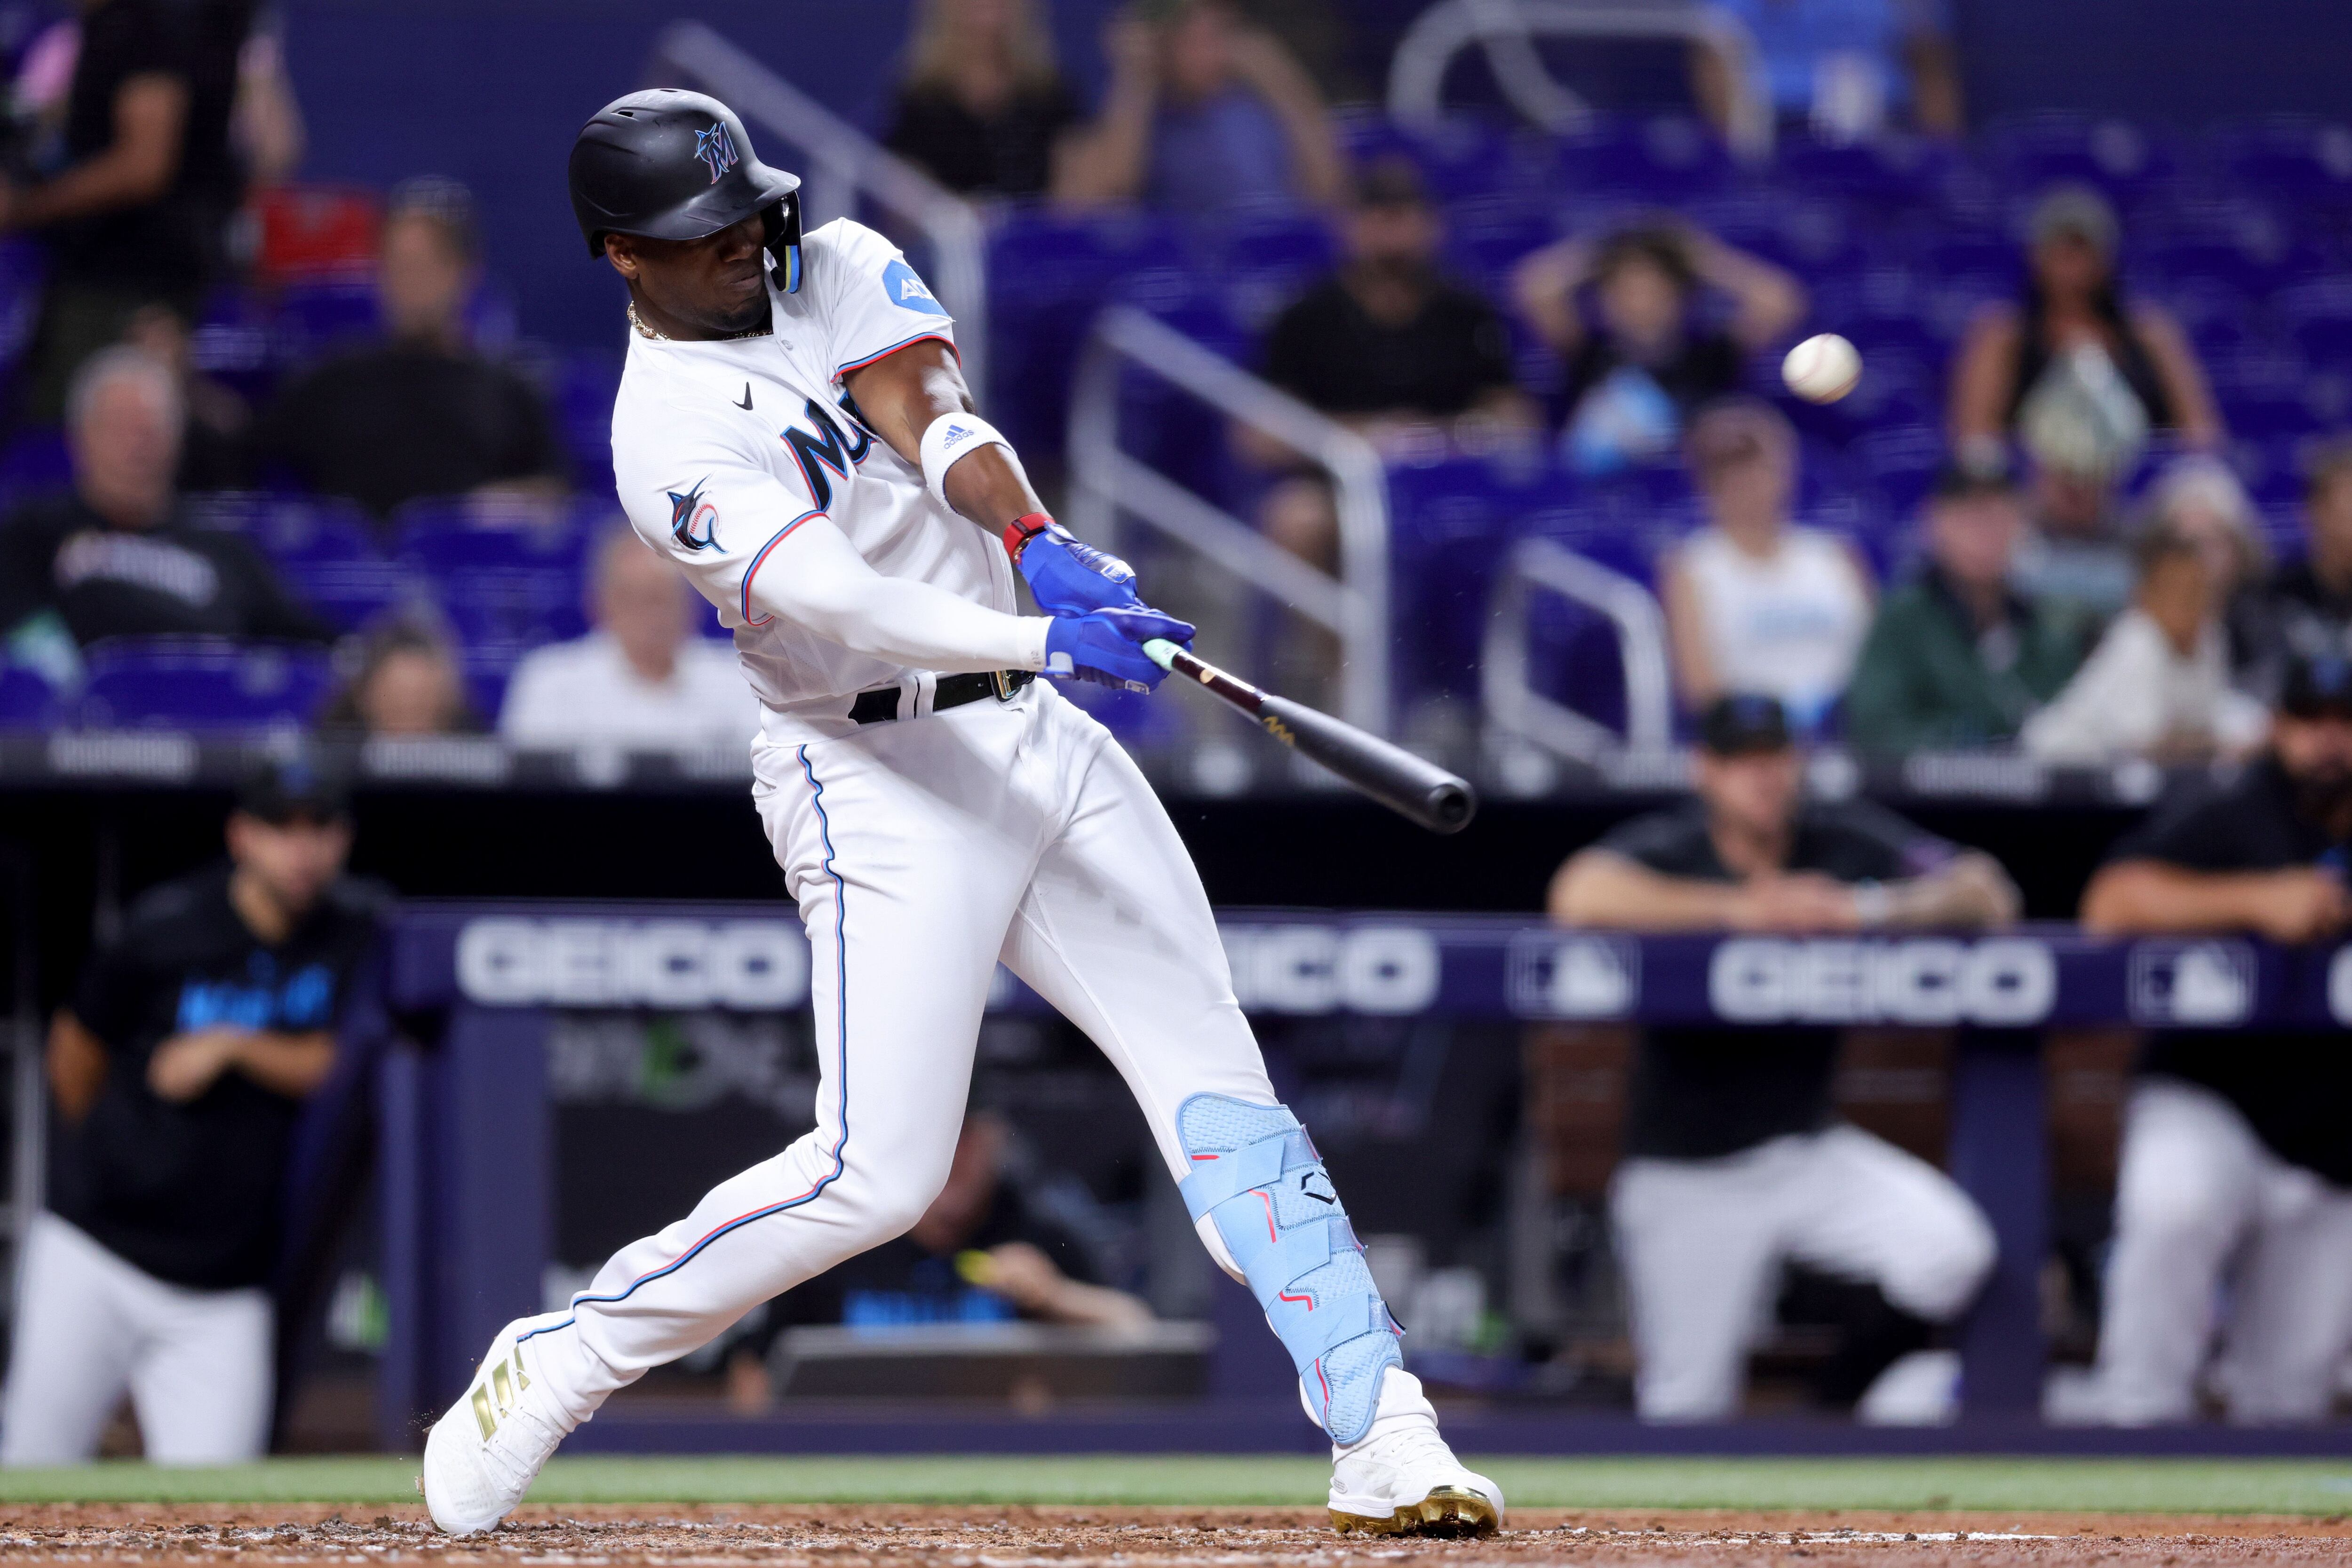 2023 MLB futures predictions, odds, picks: The betting favorites to